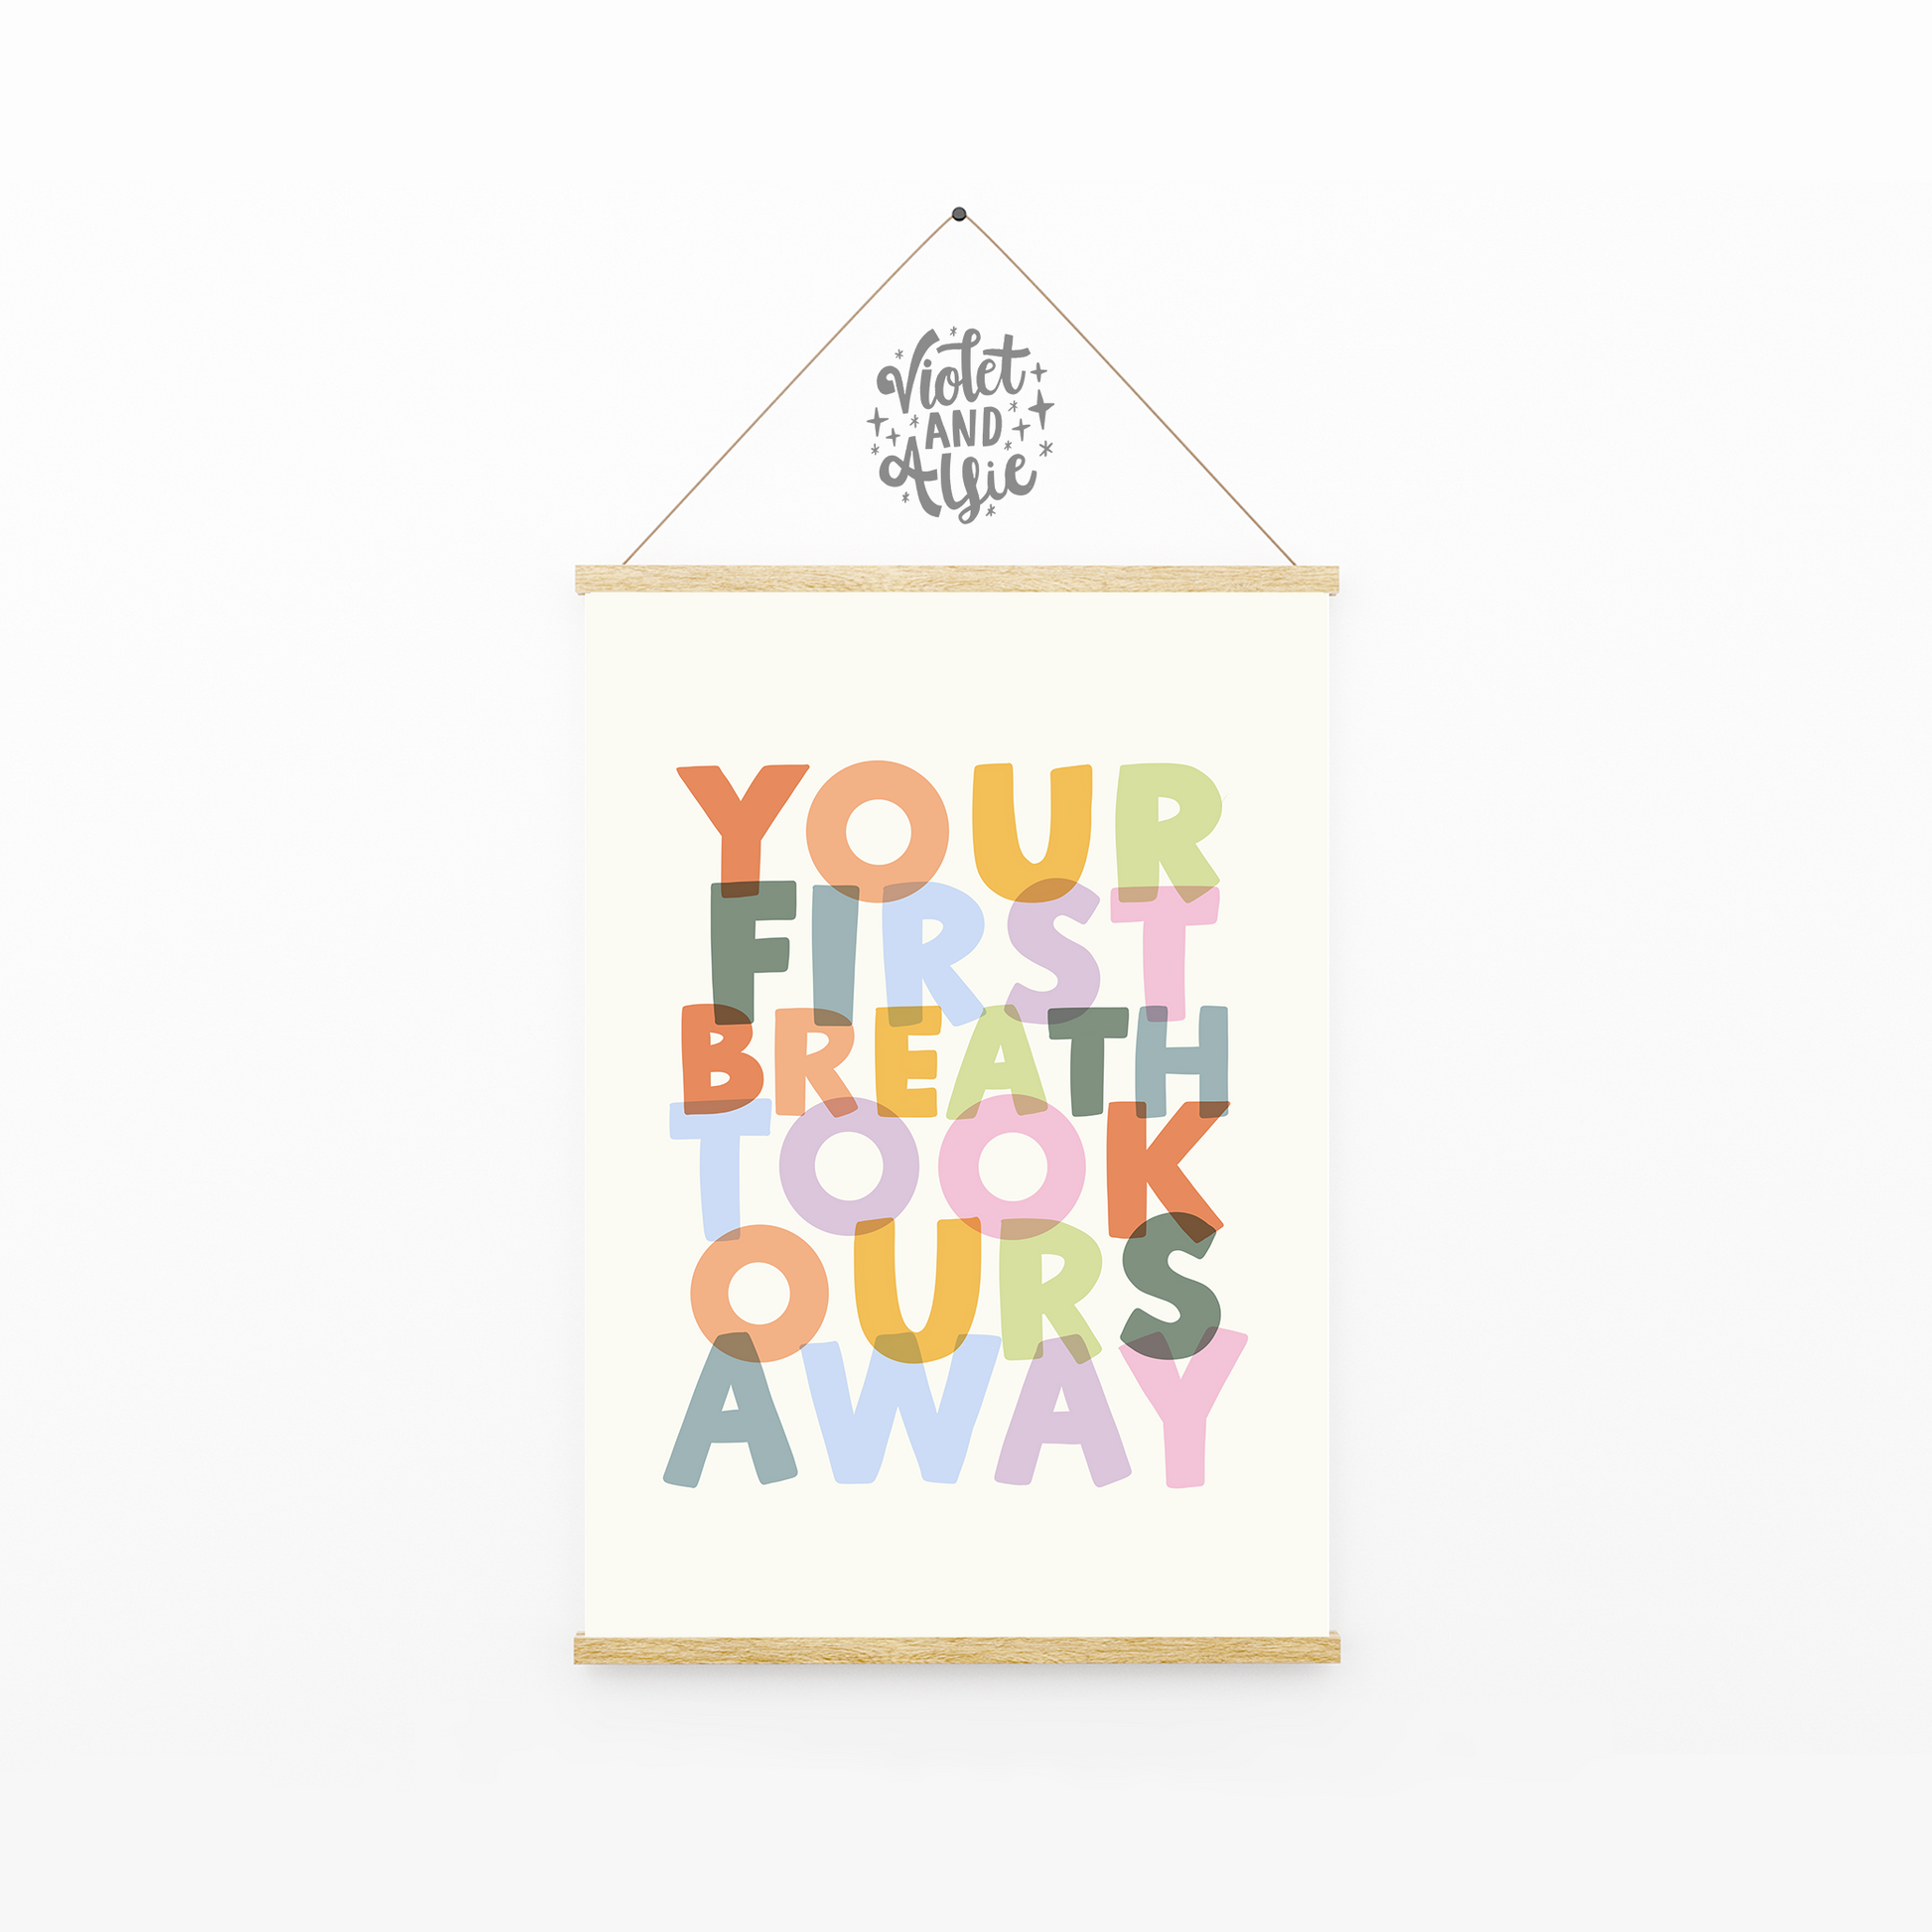 Your first breath took ours away, warm pastel tones, First Breath Nursery Print, Baby Wall Art, Love Quote Print, Typographic Wall Art for Baby Room, Prints For Nursery, Boho Nursery Decor, Pastel   Rainbow Decor, Baby Prints A5 A4 A3 size